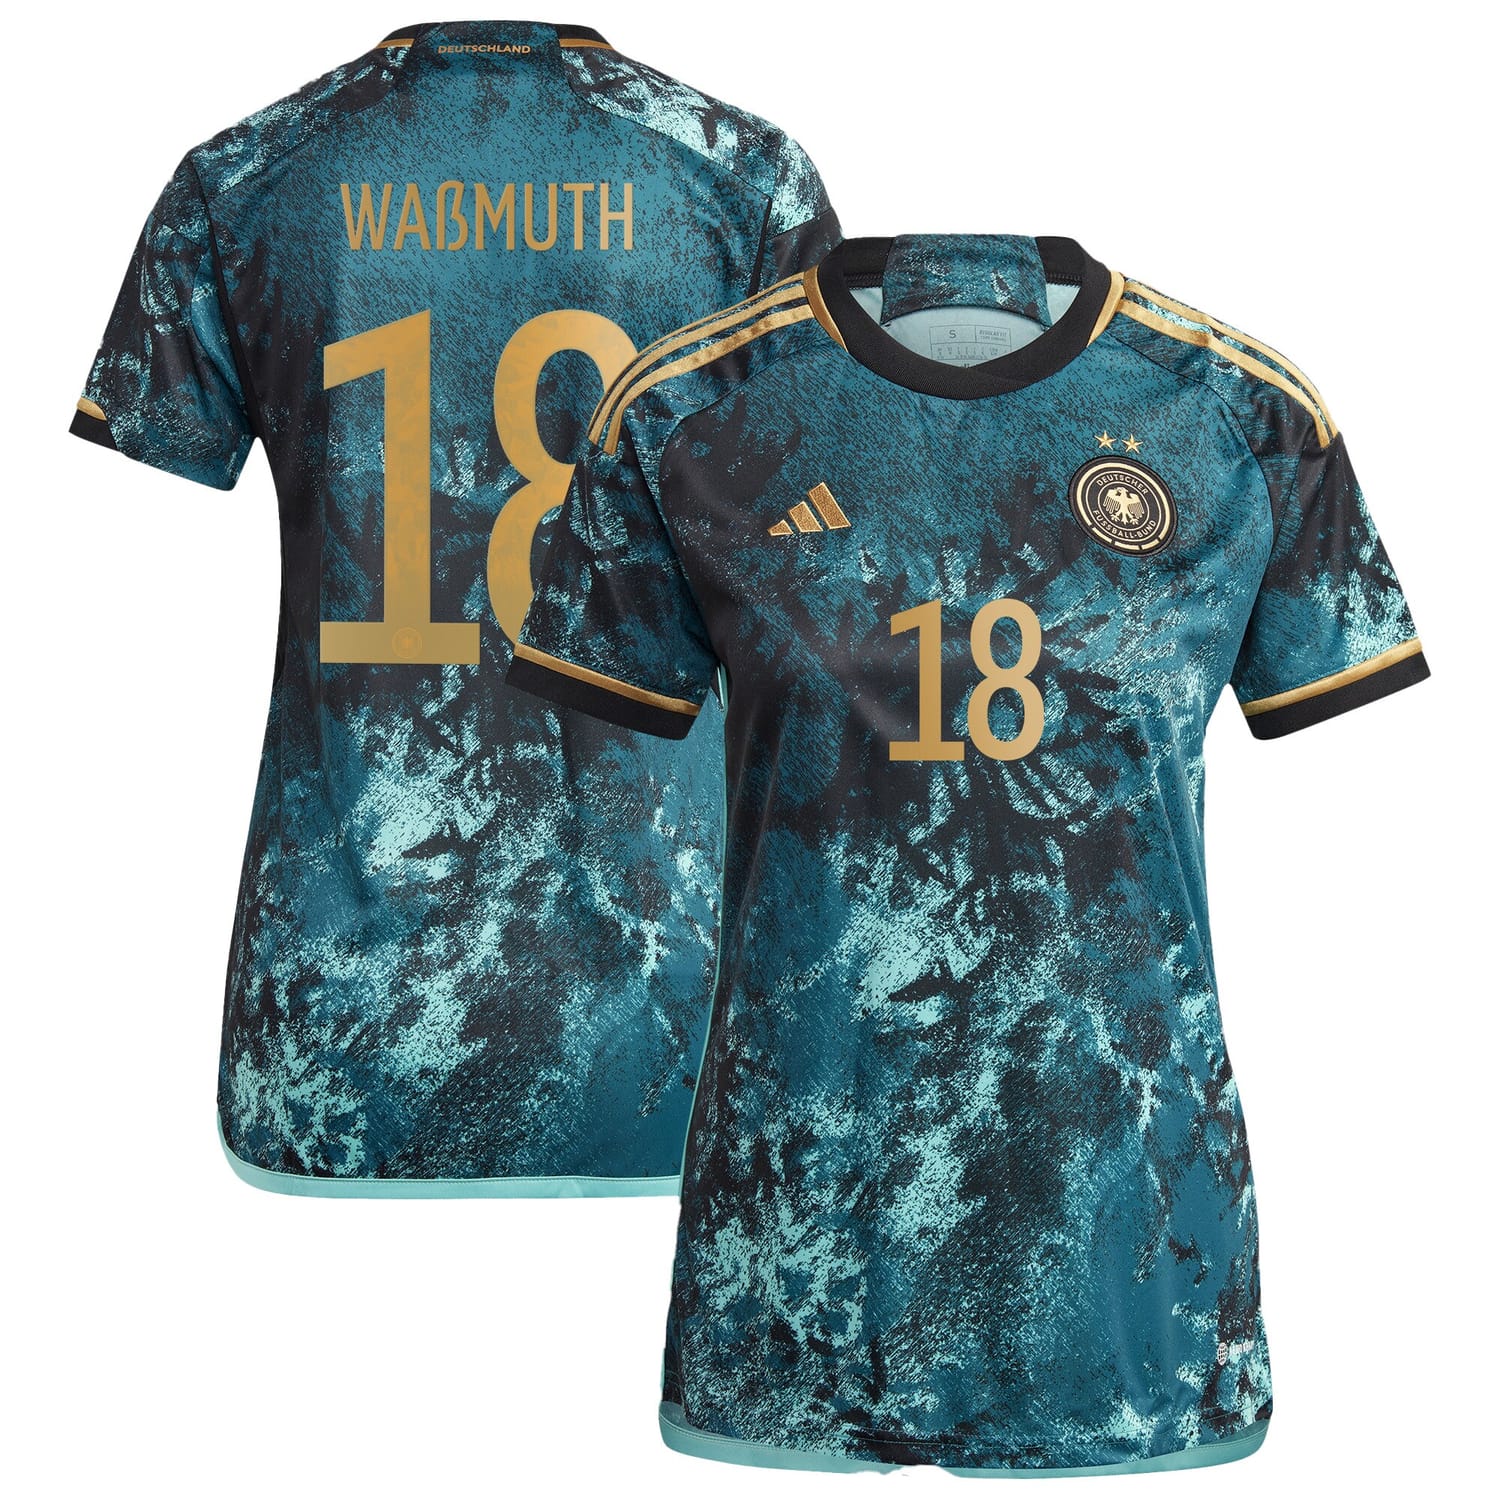 Germany National Team Away Jersey Shirt 2023 player Tabea Waßmuth 18 printing for Women